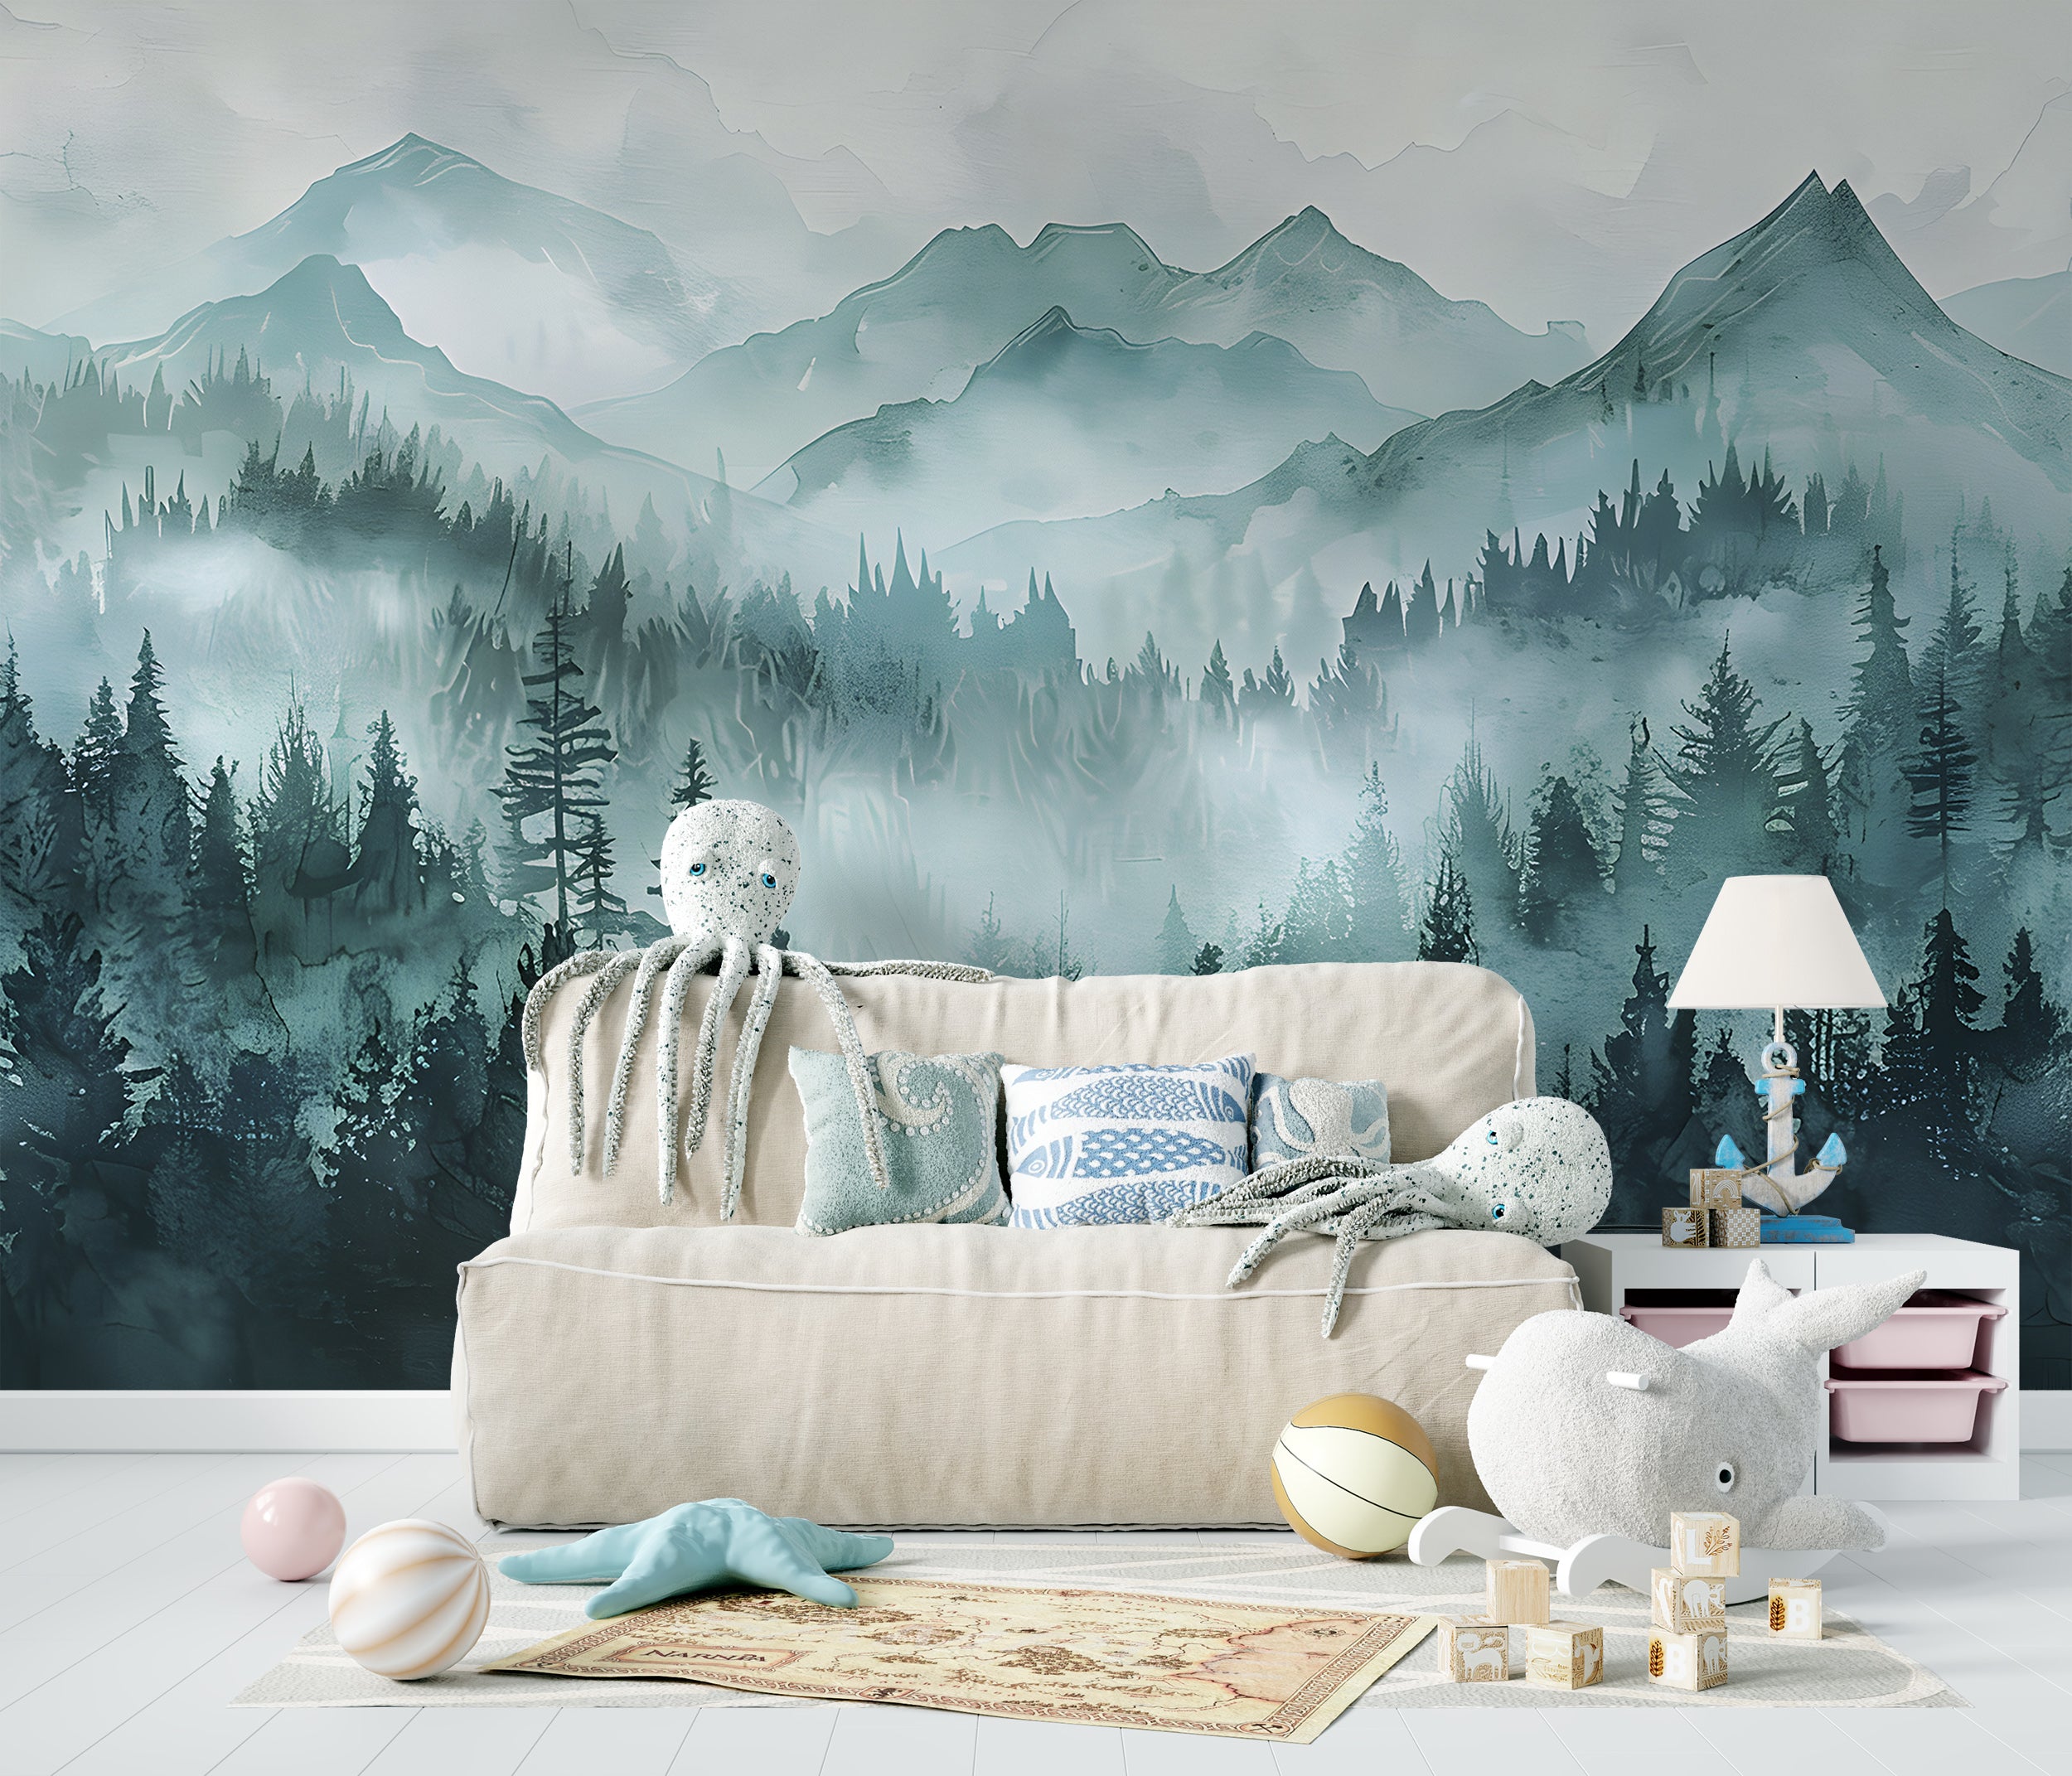 Watercolor Mountains and Forest Mural, Abstract Mint Mountain Wallpaper, Nursery Peel and Stick Soft Green Landscape Mural, PVC free Decor